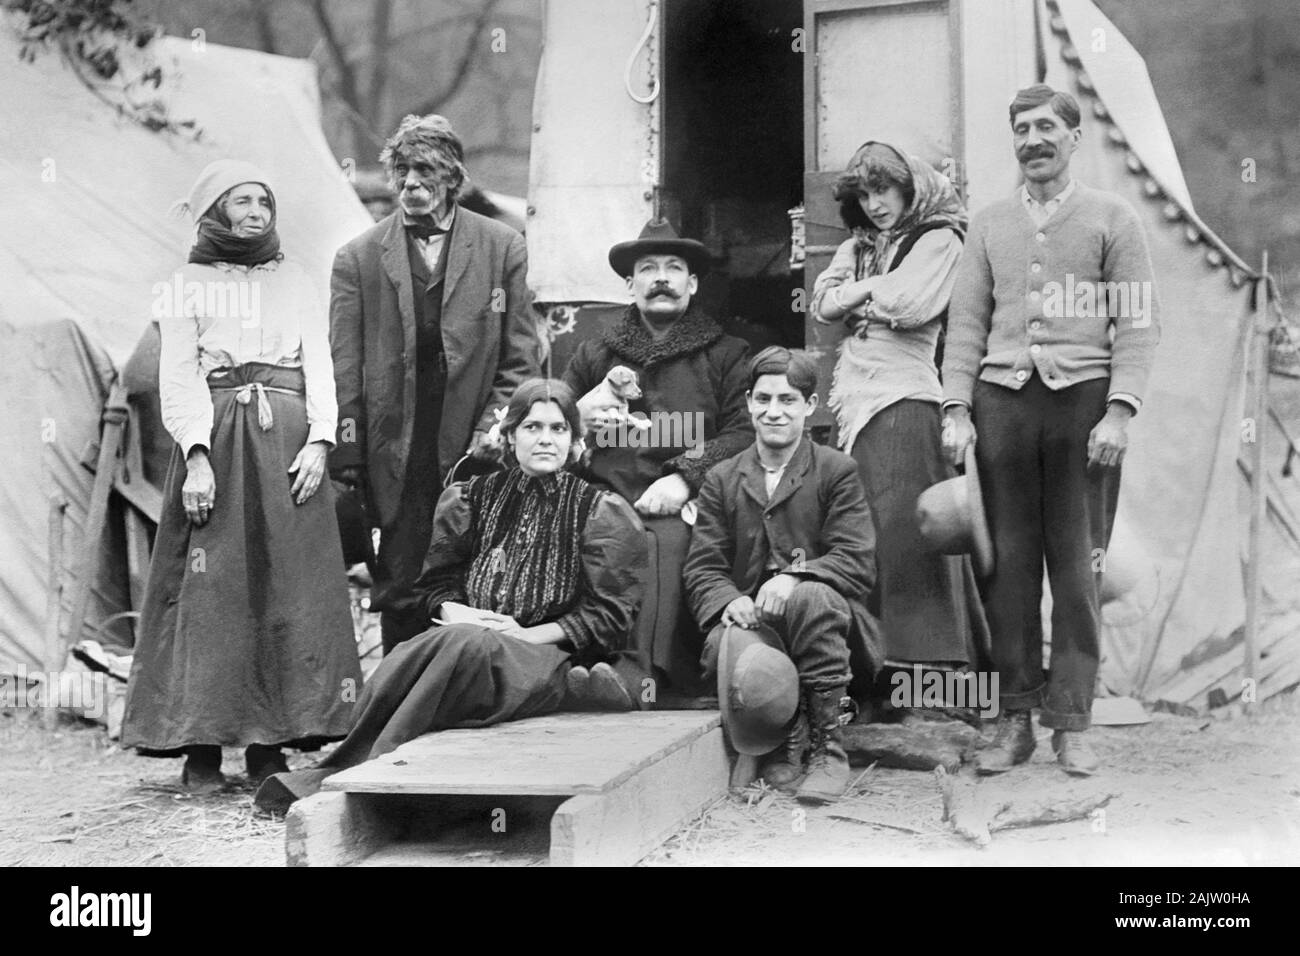 Popular British Christian evangelist Rodney 'Gipsy' Smith MBE (1860-1947) among other gypsies in Pittsburgh, Pennsylvania in January, 1909. Stock Photo